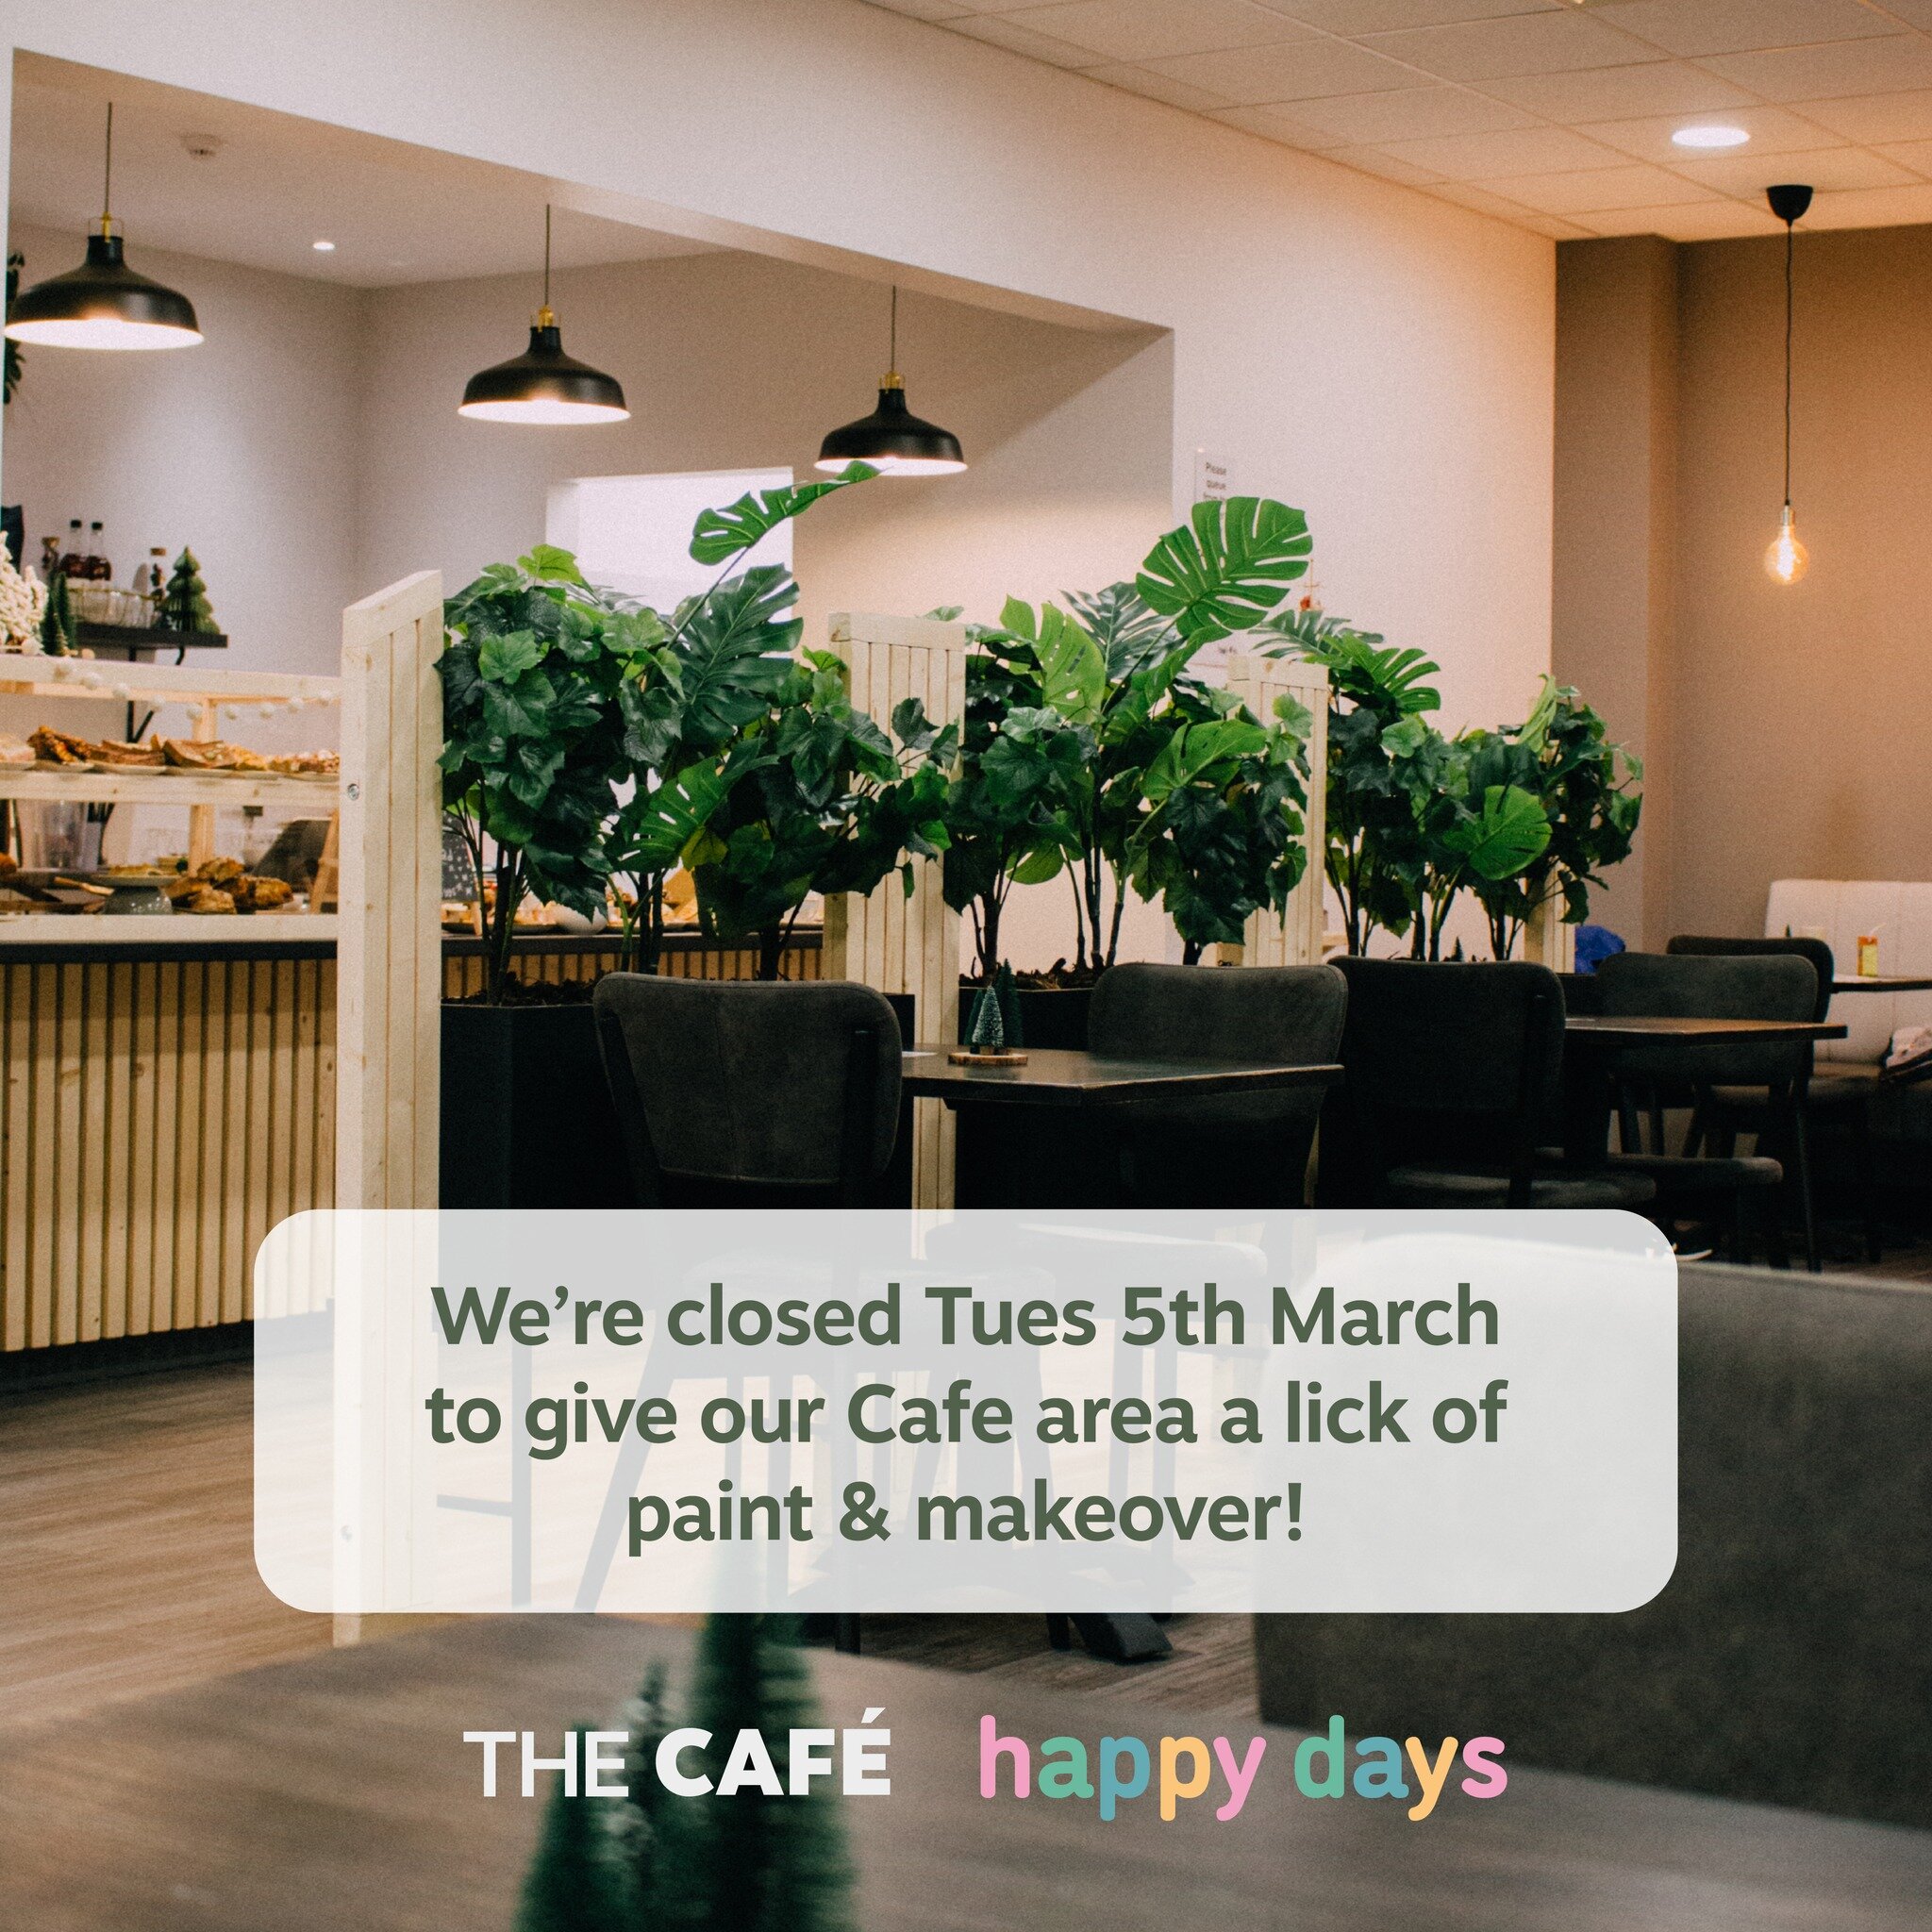 ✨ Happy Days &amp; our cafe are both closed Tuesday 5th March to give our Cafe area a little refresh! We're excited to show you our space updated for you all to enjoy ✨